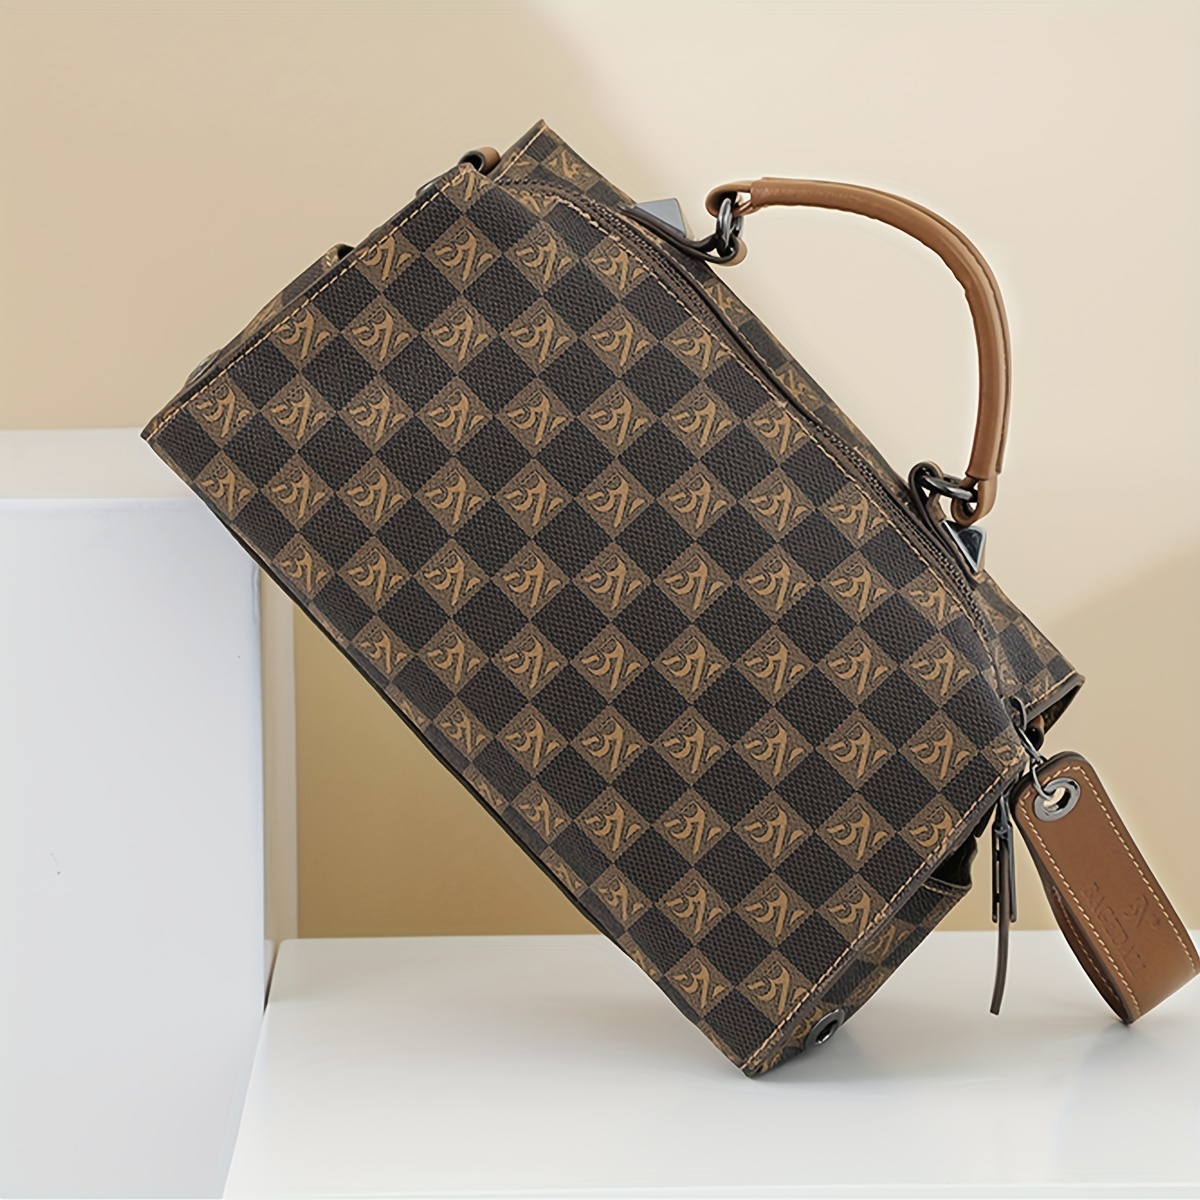 Louis Vuitton 1 Monogram with Veg Tan Leather Face mask use together with  another 4 Layers Face mask